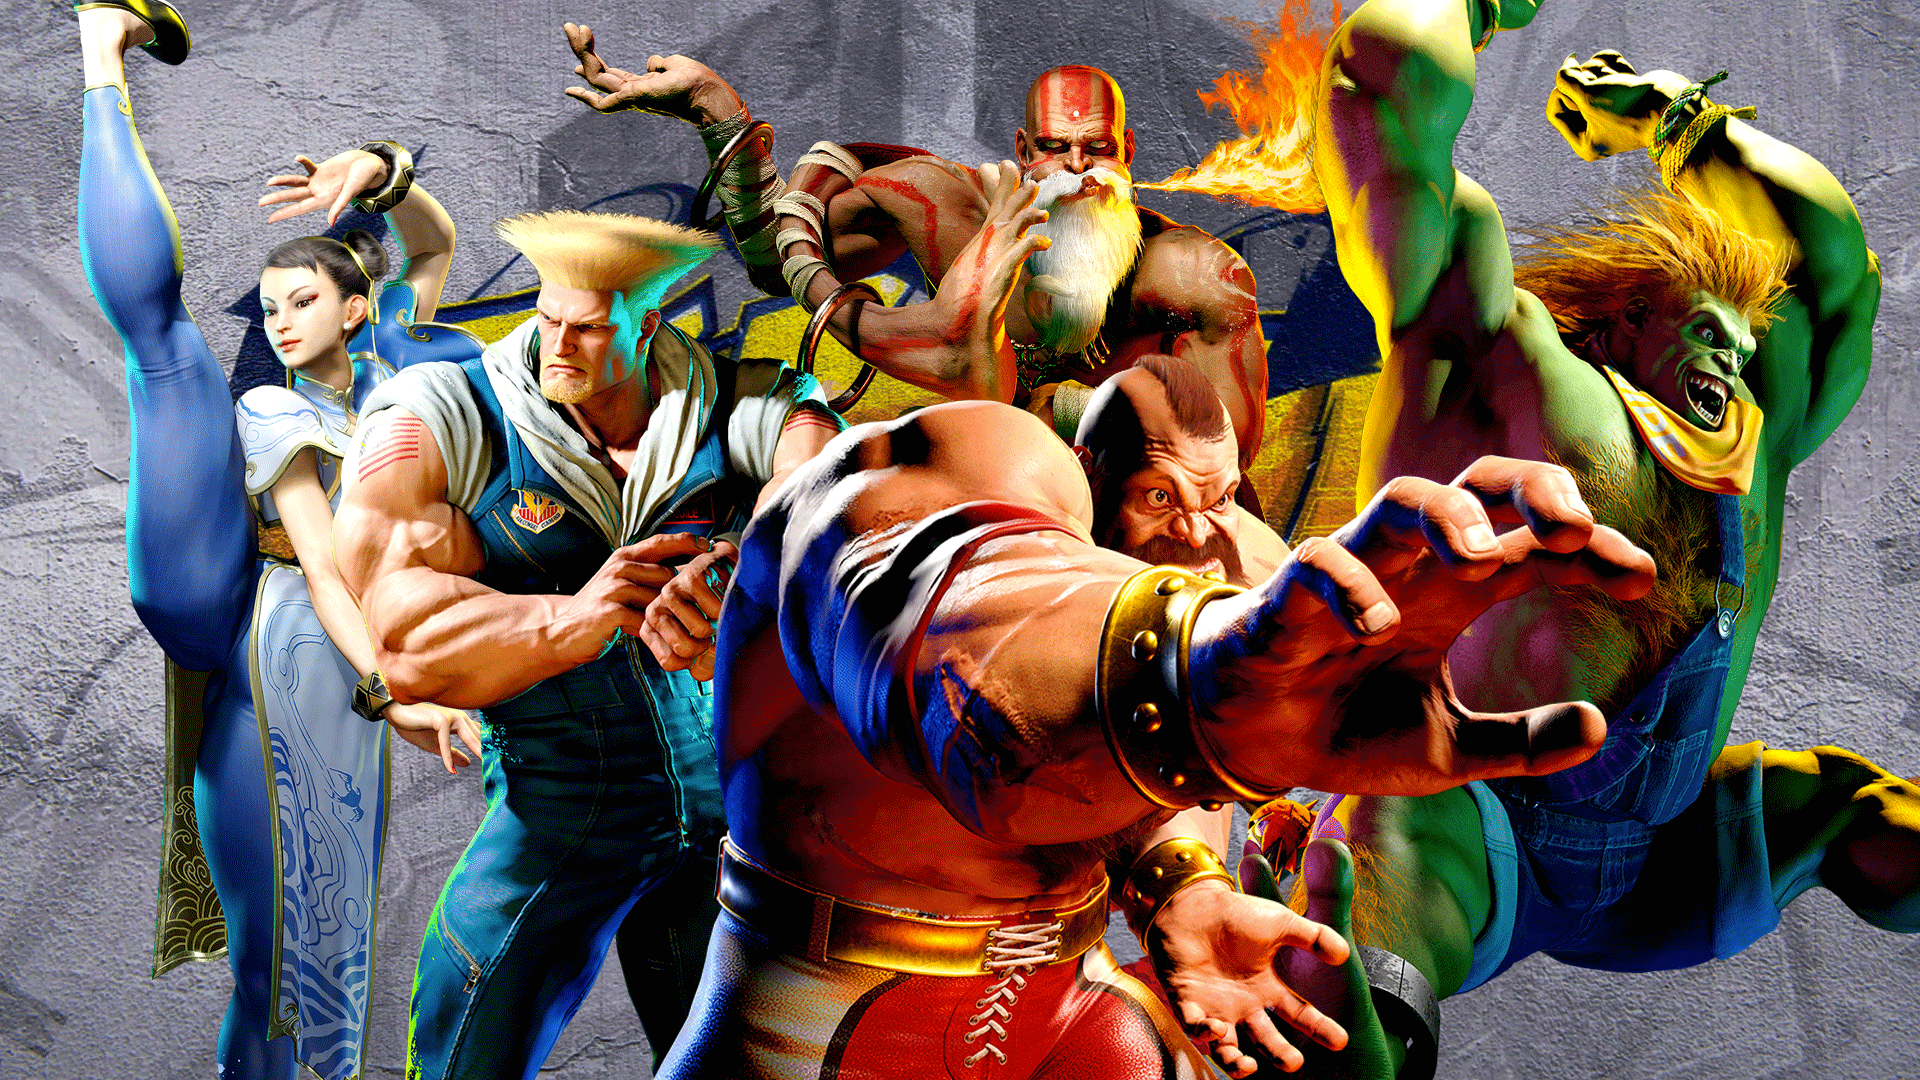 Street Fighter 6 lets each player have their stage of choice in